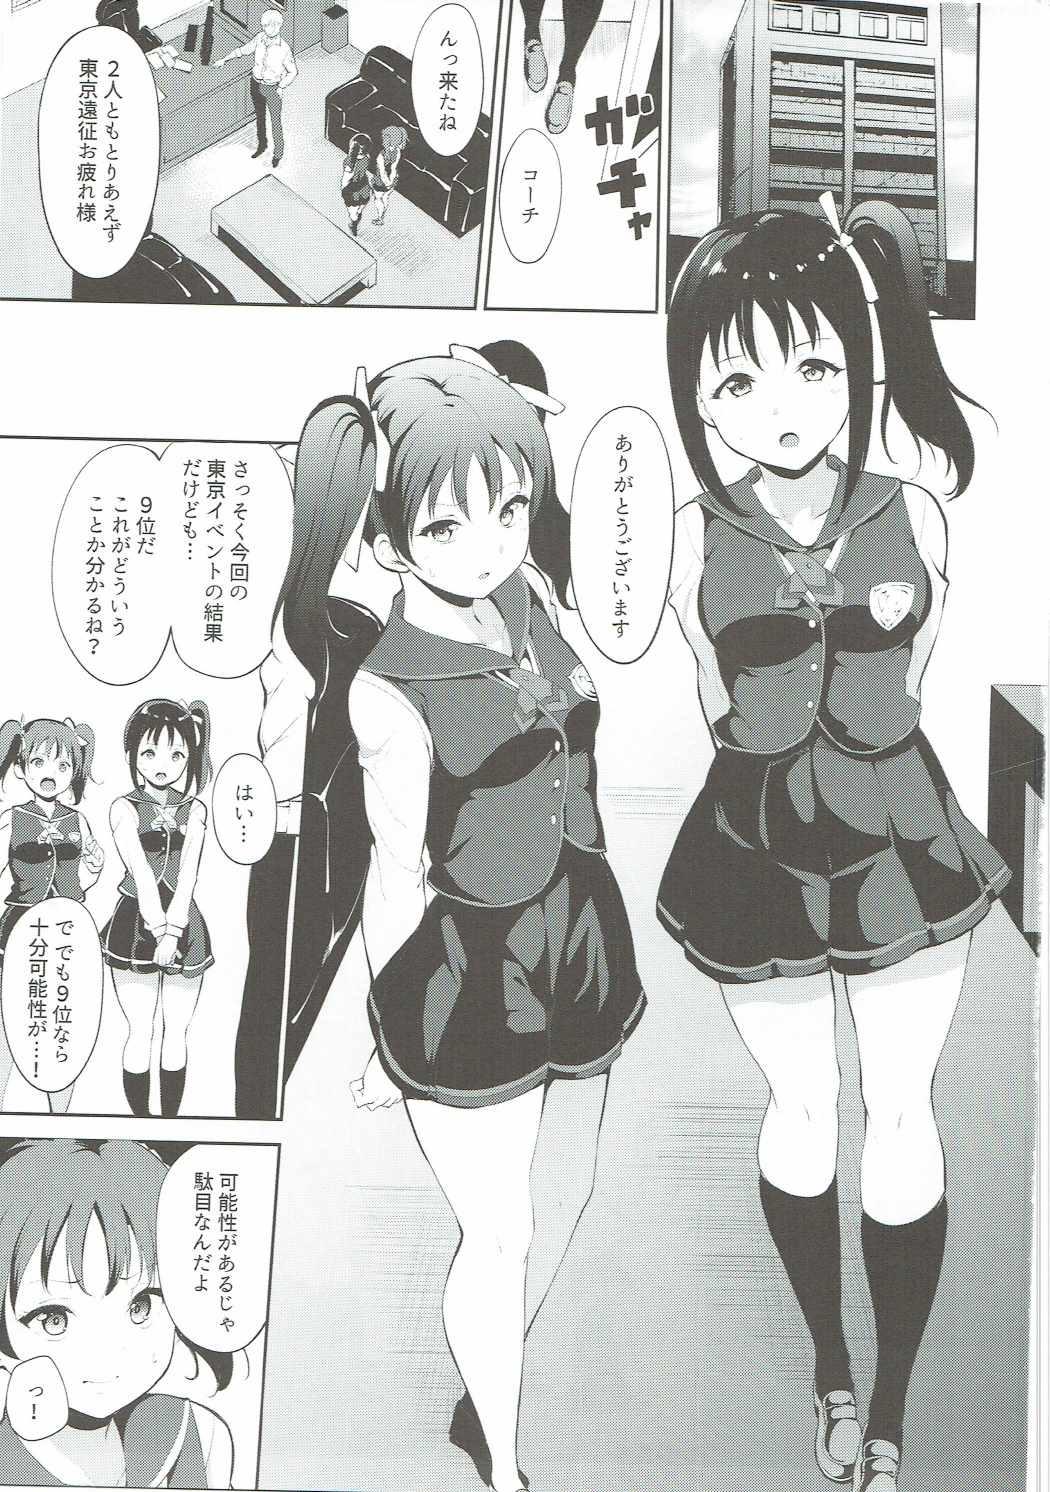 Gay College TRANCE CONTROL - Love live sunshine Ex Girlfriends - Page 2